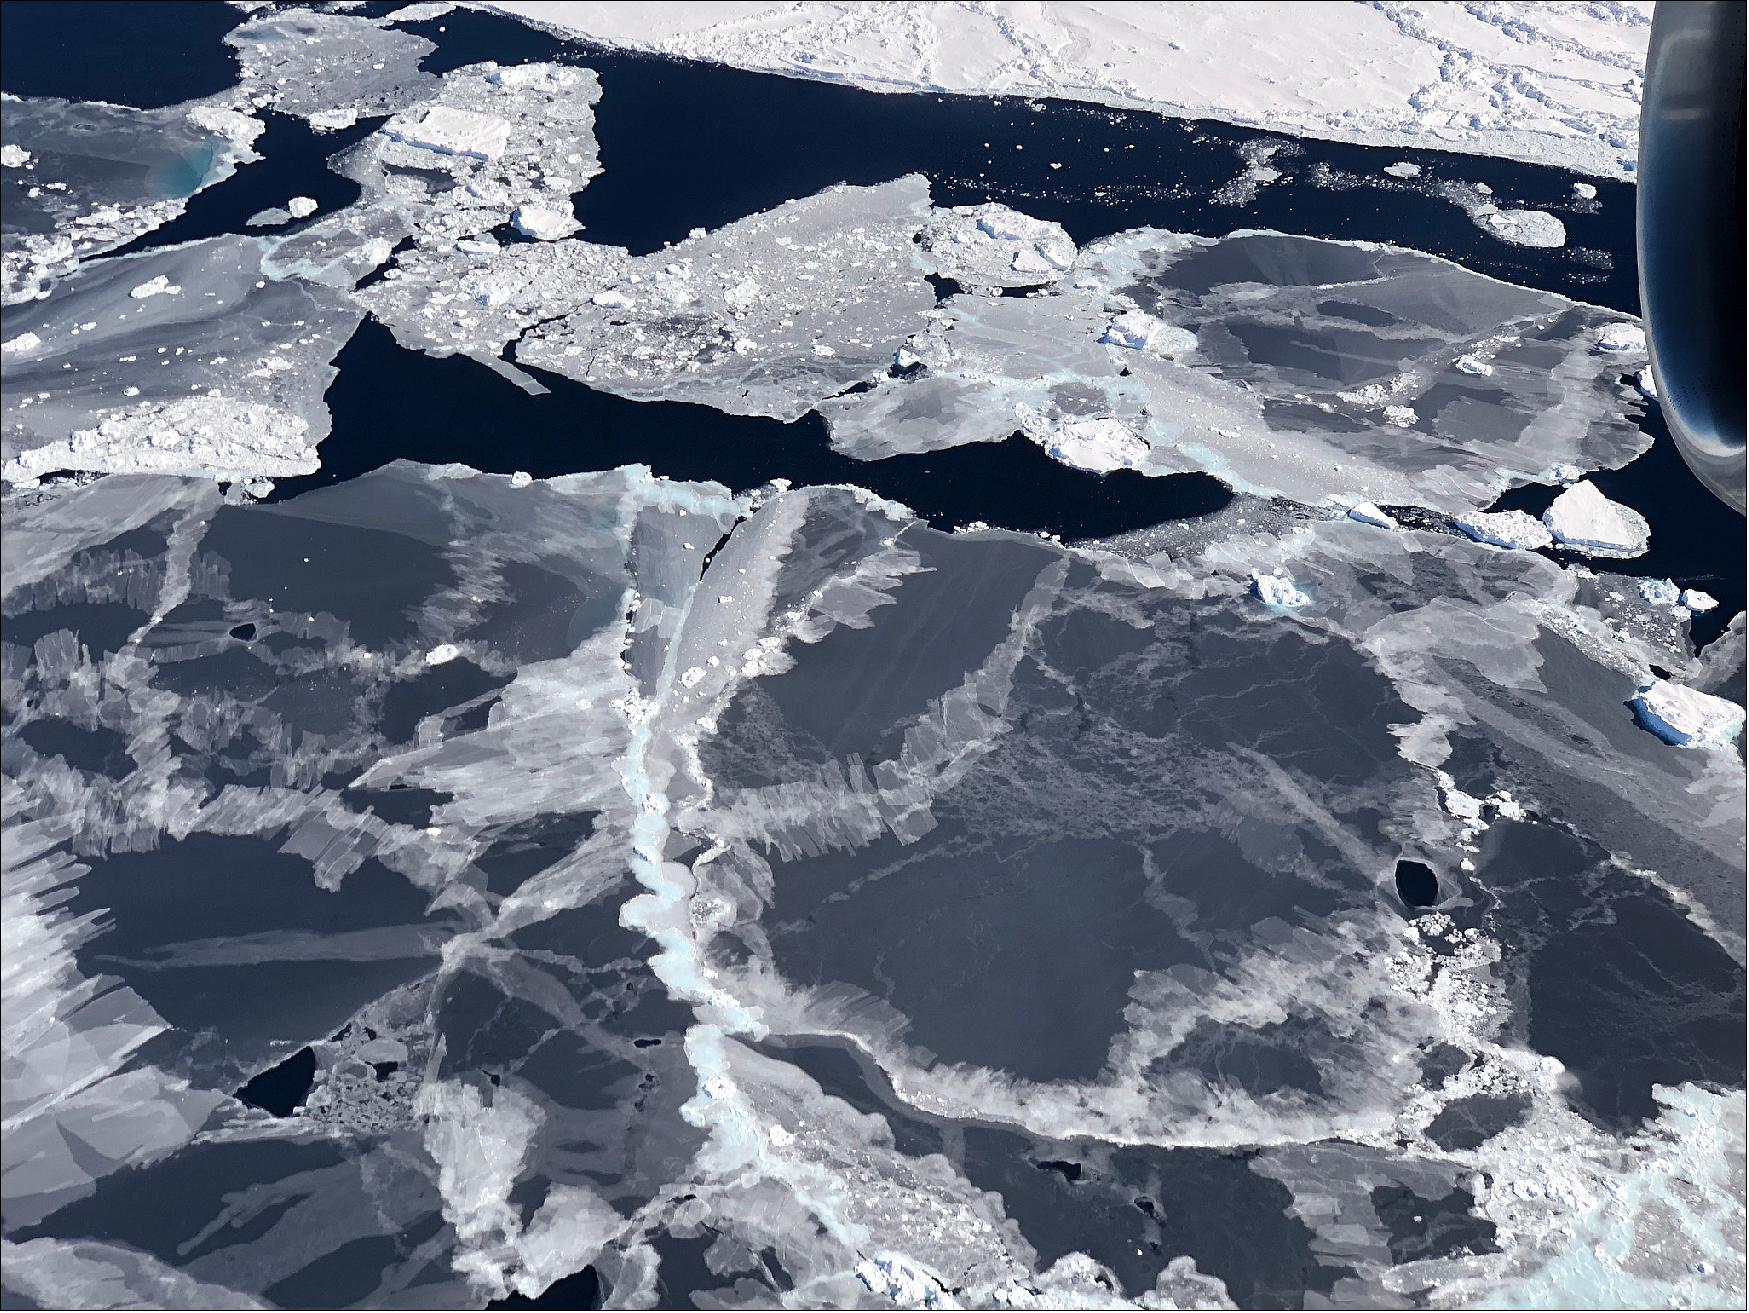 Figure 54: Sea ice forms in the open water between floes, called leads, in the Bellingshausen Sea. ICESat-2 is able to detect the thin sea ice, allowing scientists to more accurately track seasonal ice formation (image credit: NASA)